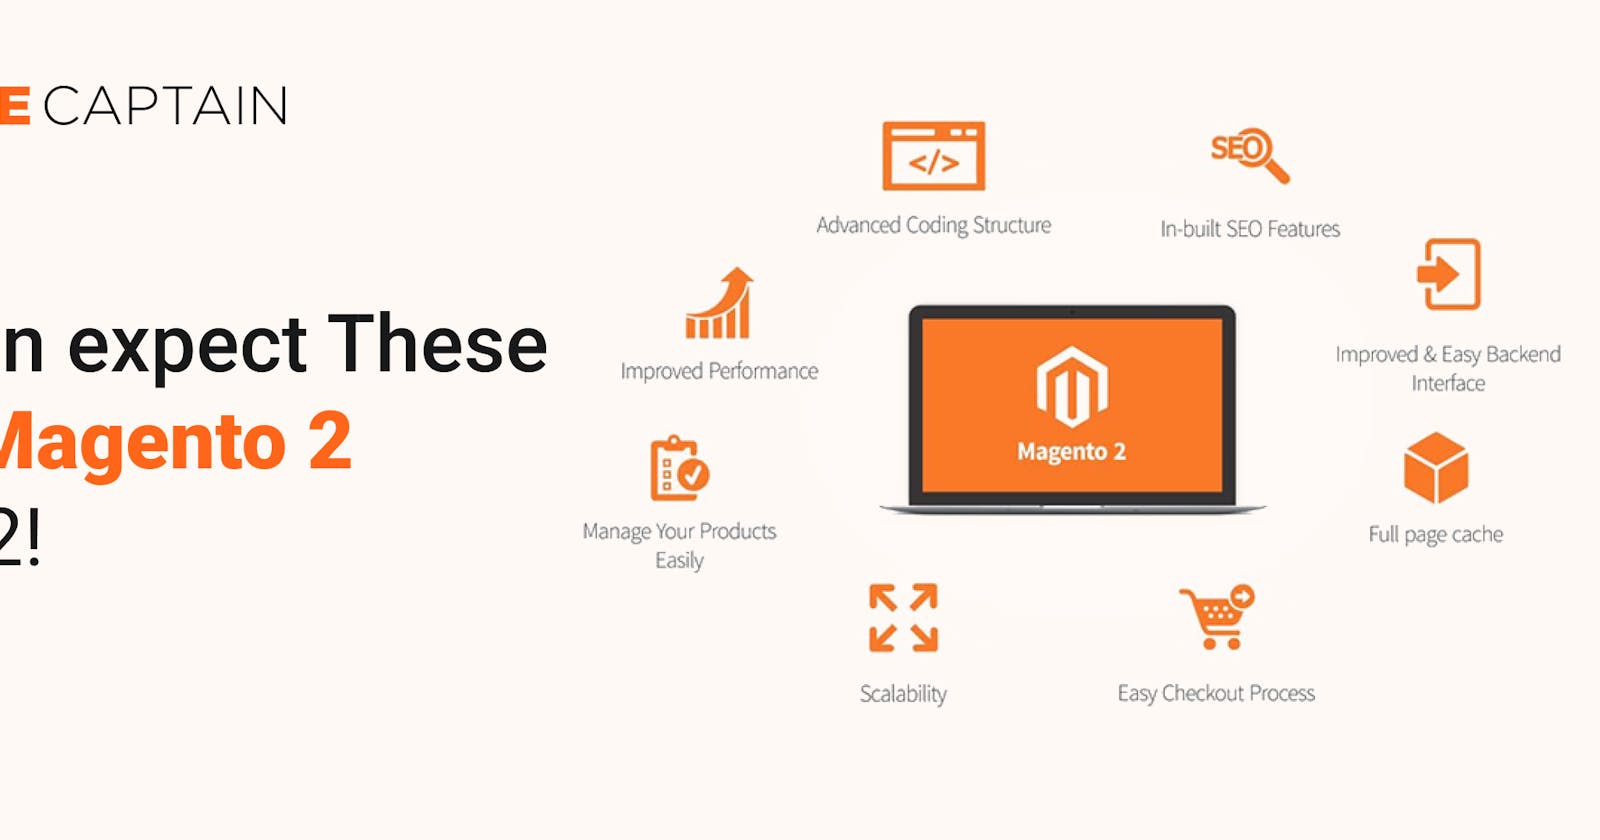 Update Magento To latest Version And You Could Expect These From It In 2022